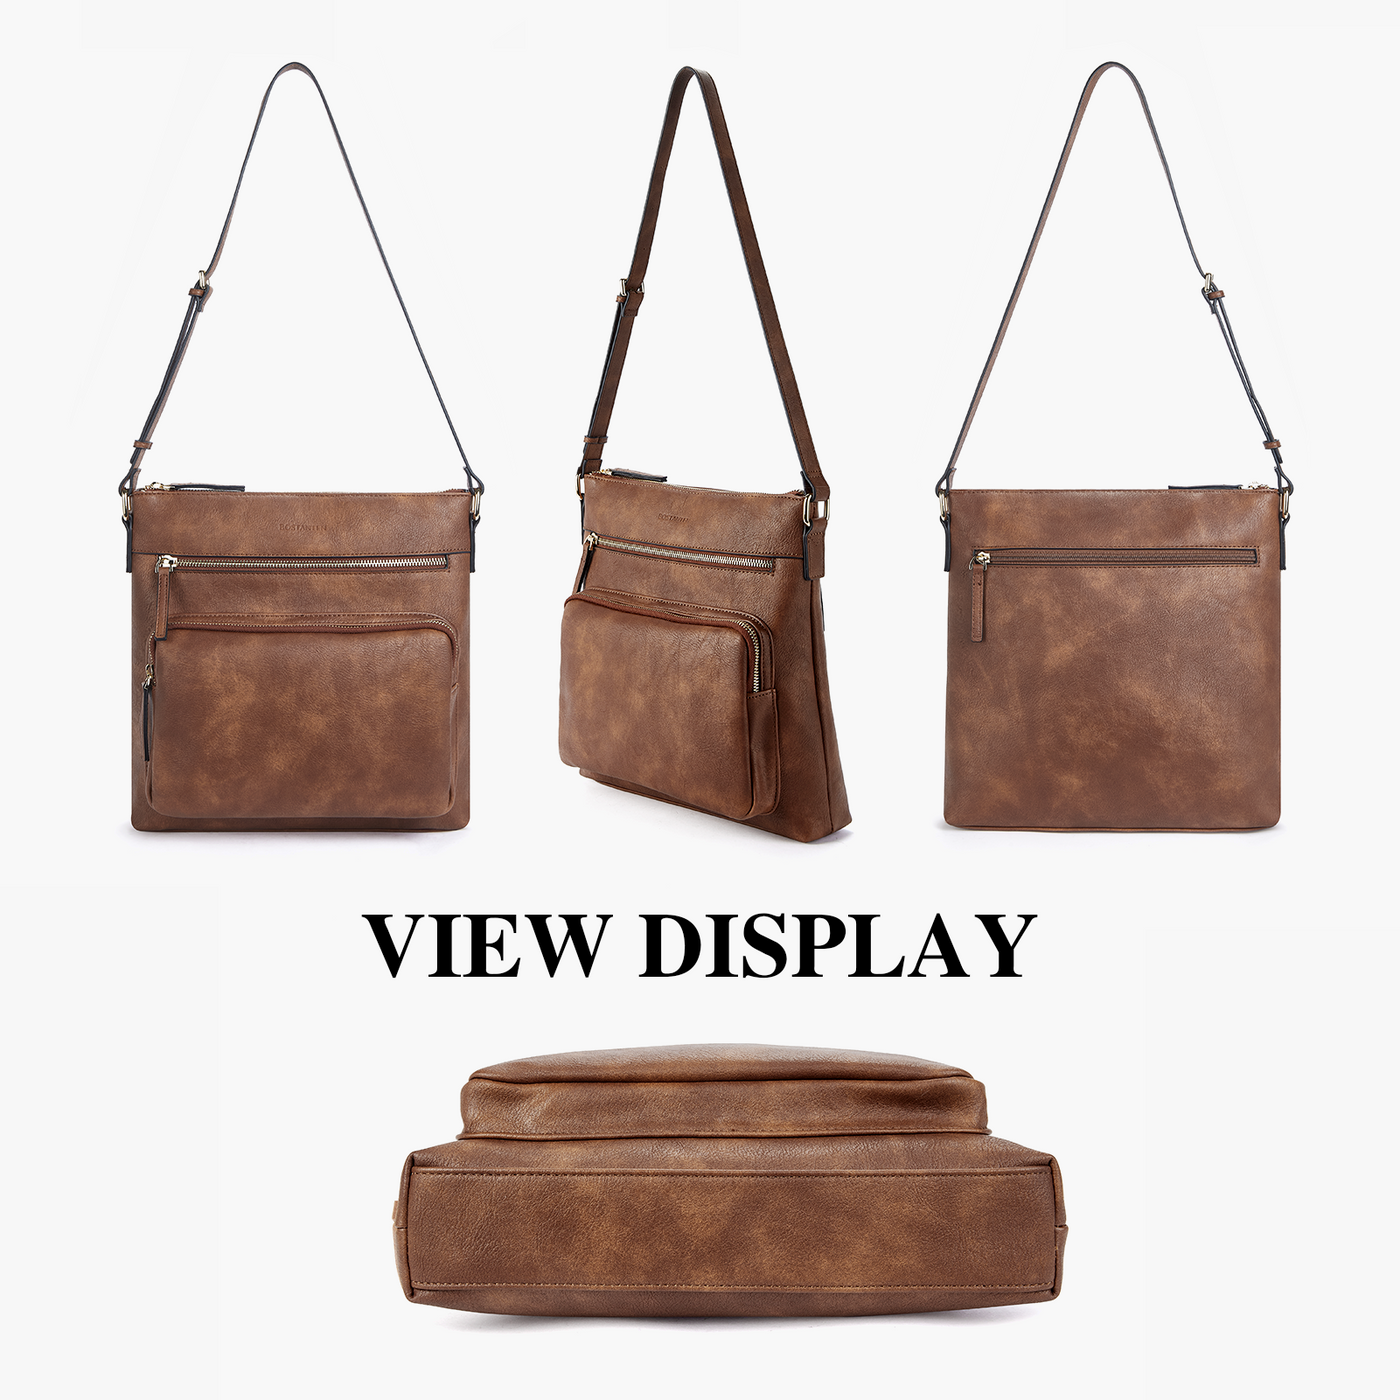 Lotty Elevate Your Style with Women's Designer Shoulder Bags